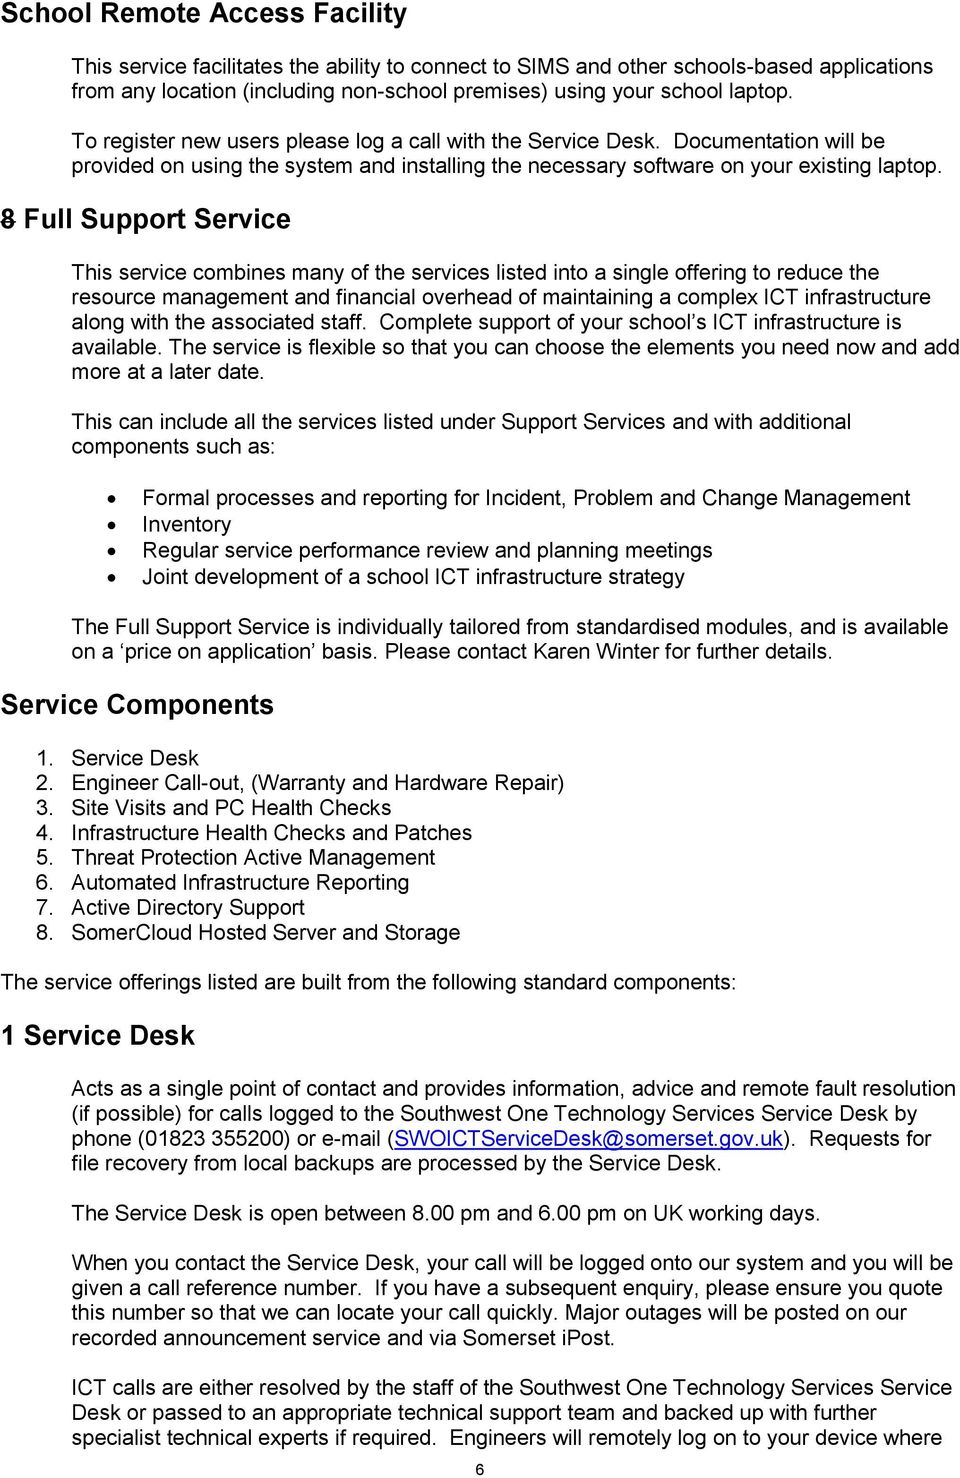 8 Full Support Service This service combines many of the services listed into a single offering to reduce the resource management and financial overhead of maintaining a complex ICT infrastructure